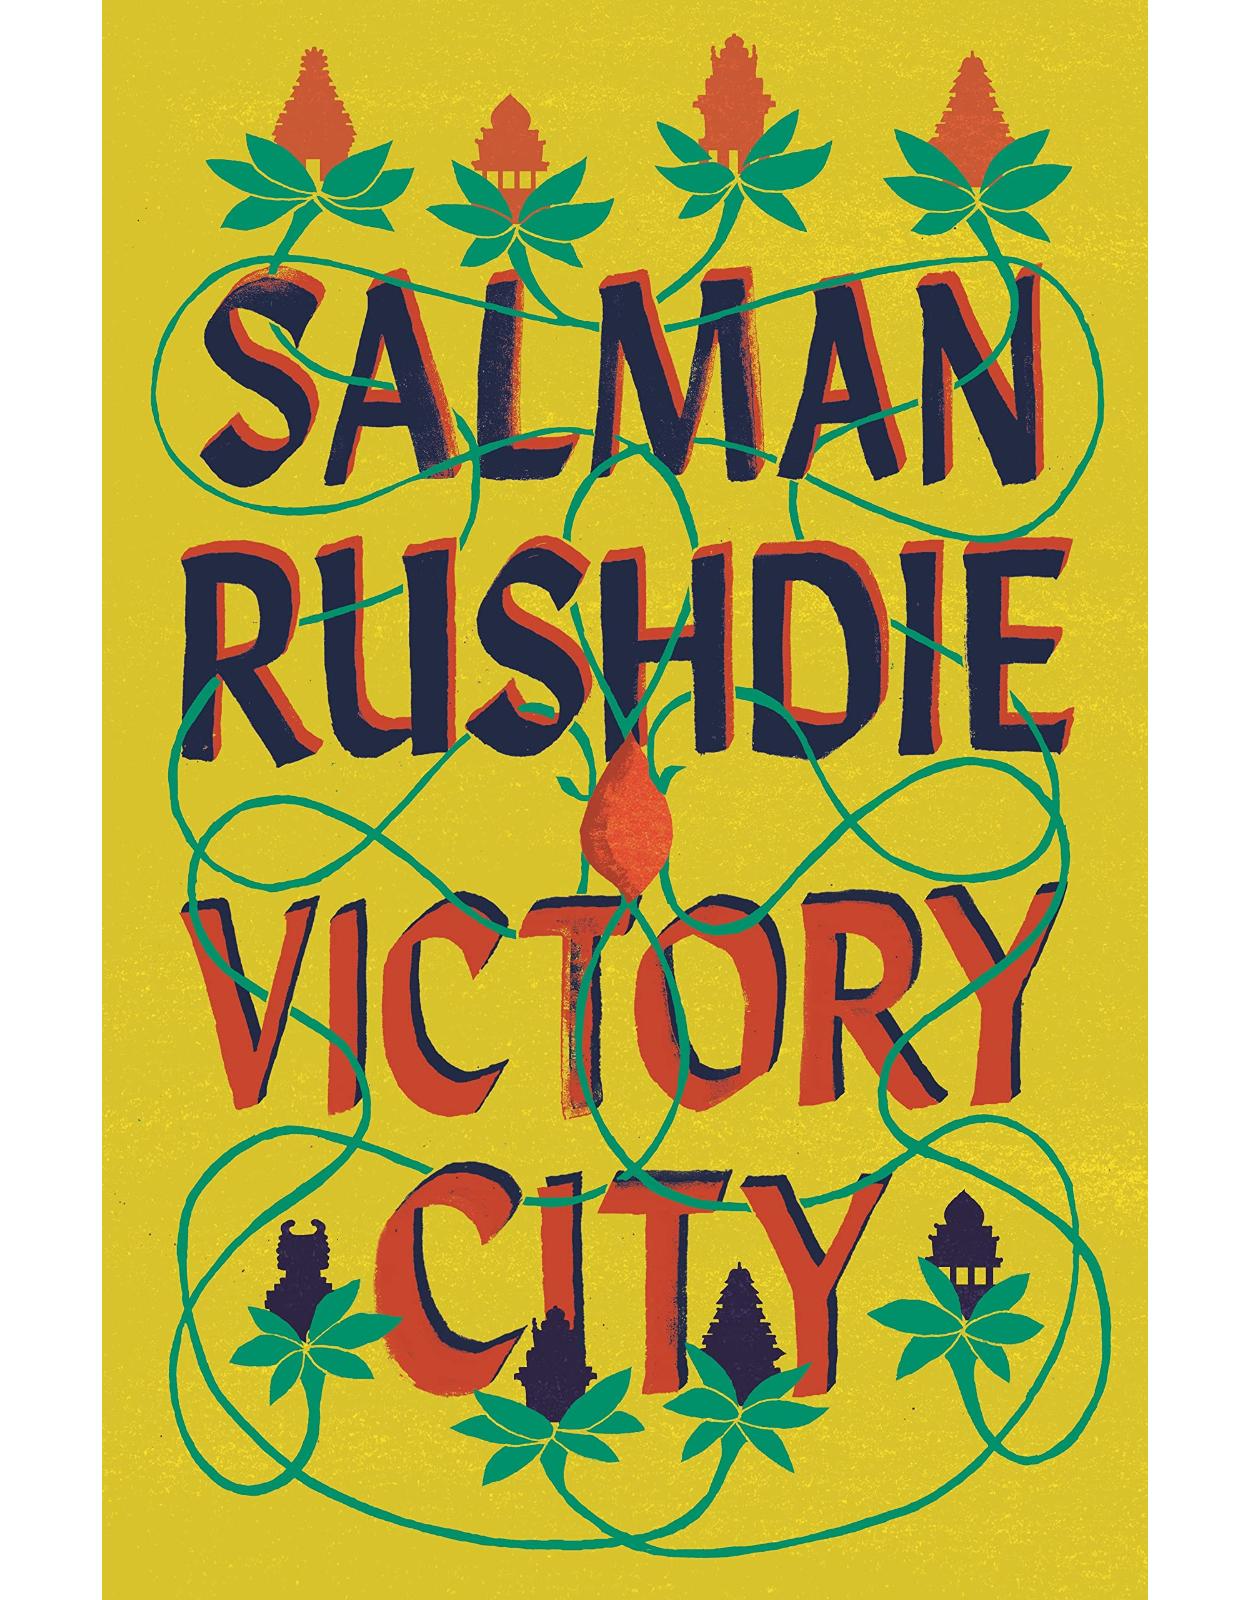 Victory City: The new novel from the Booker prize-winning